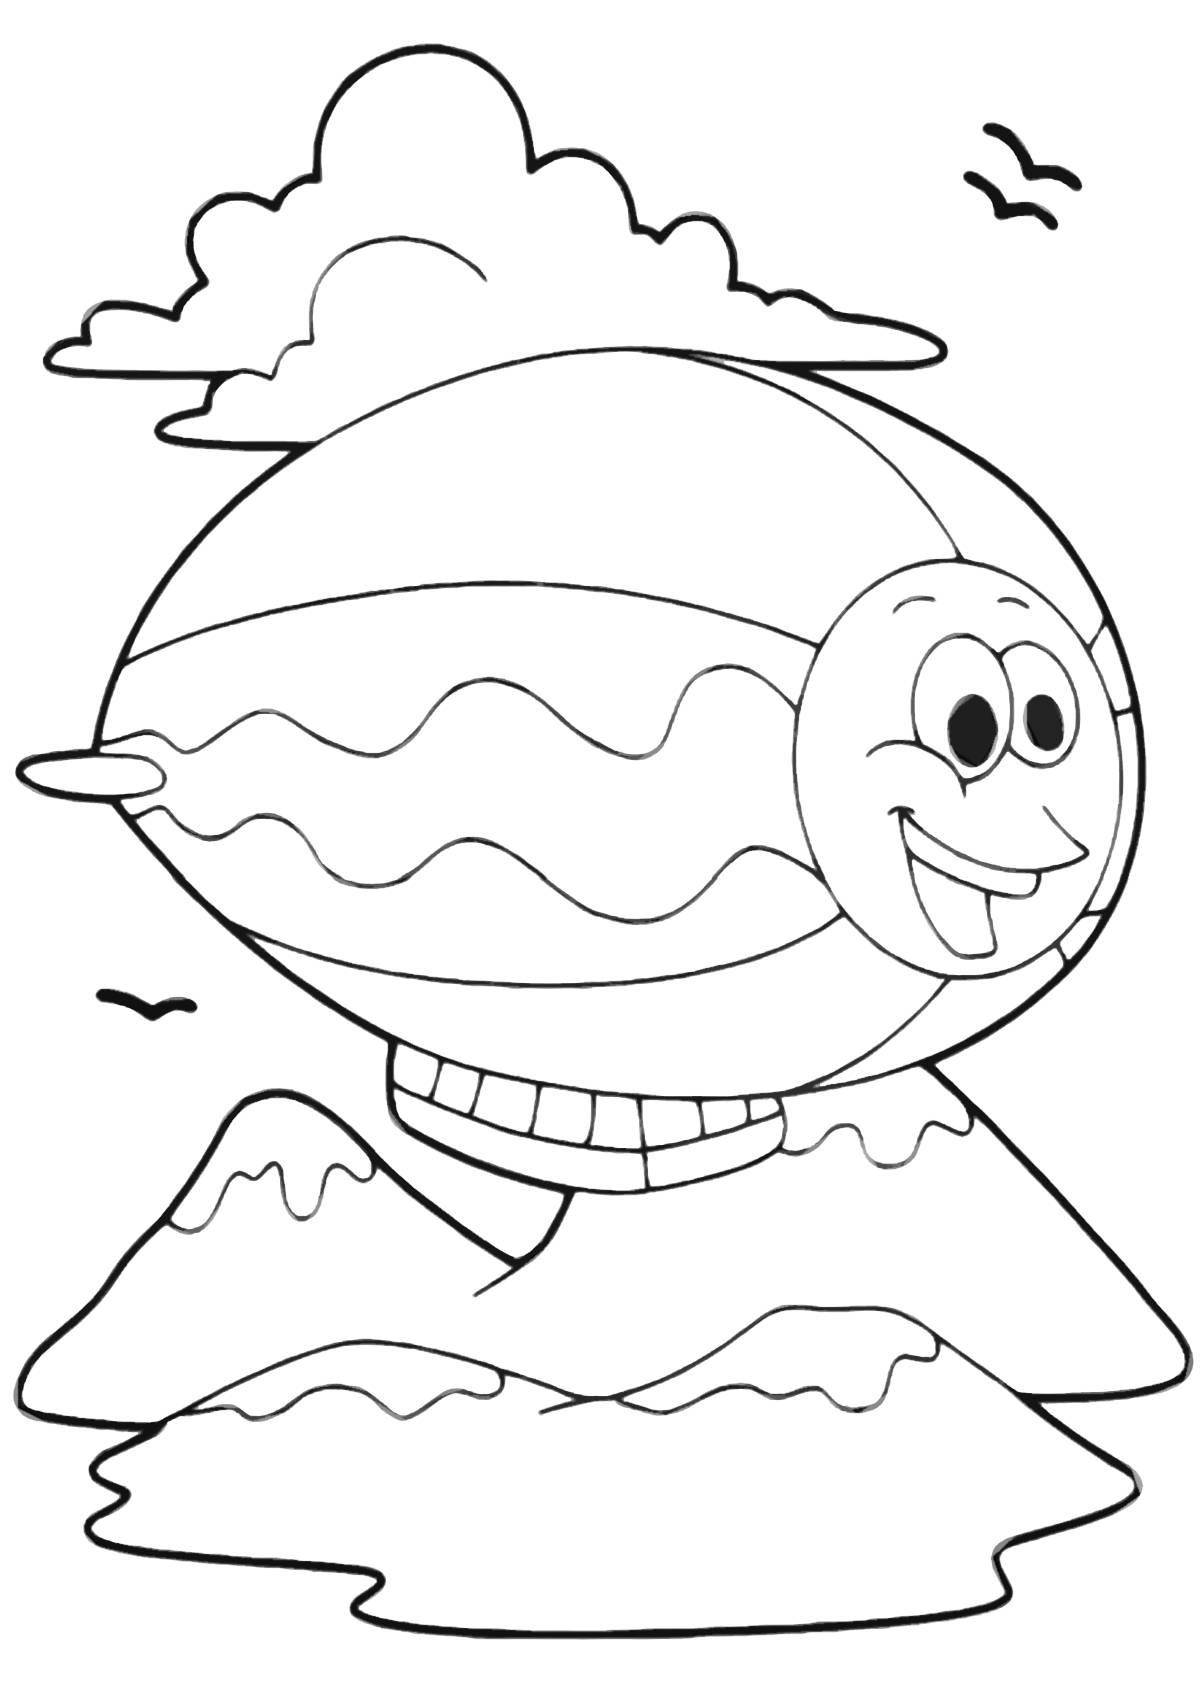 Amazing airship coloring page for kids